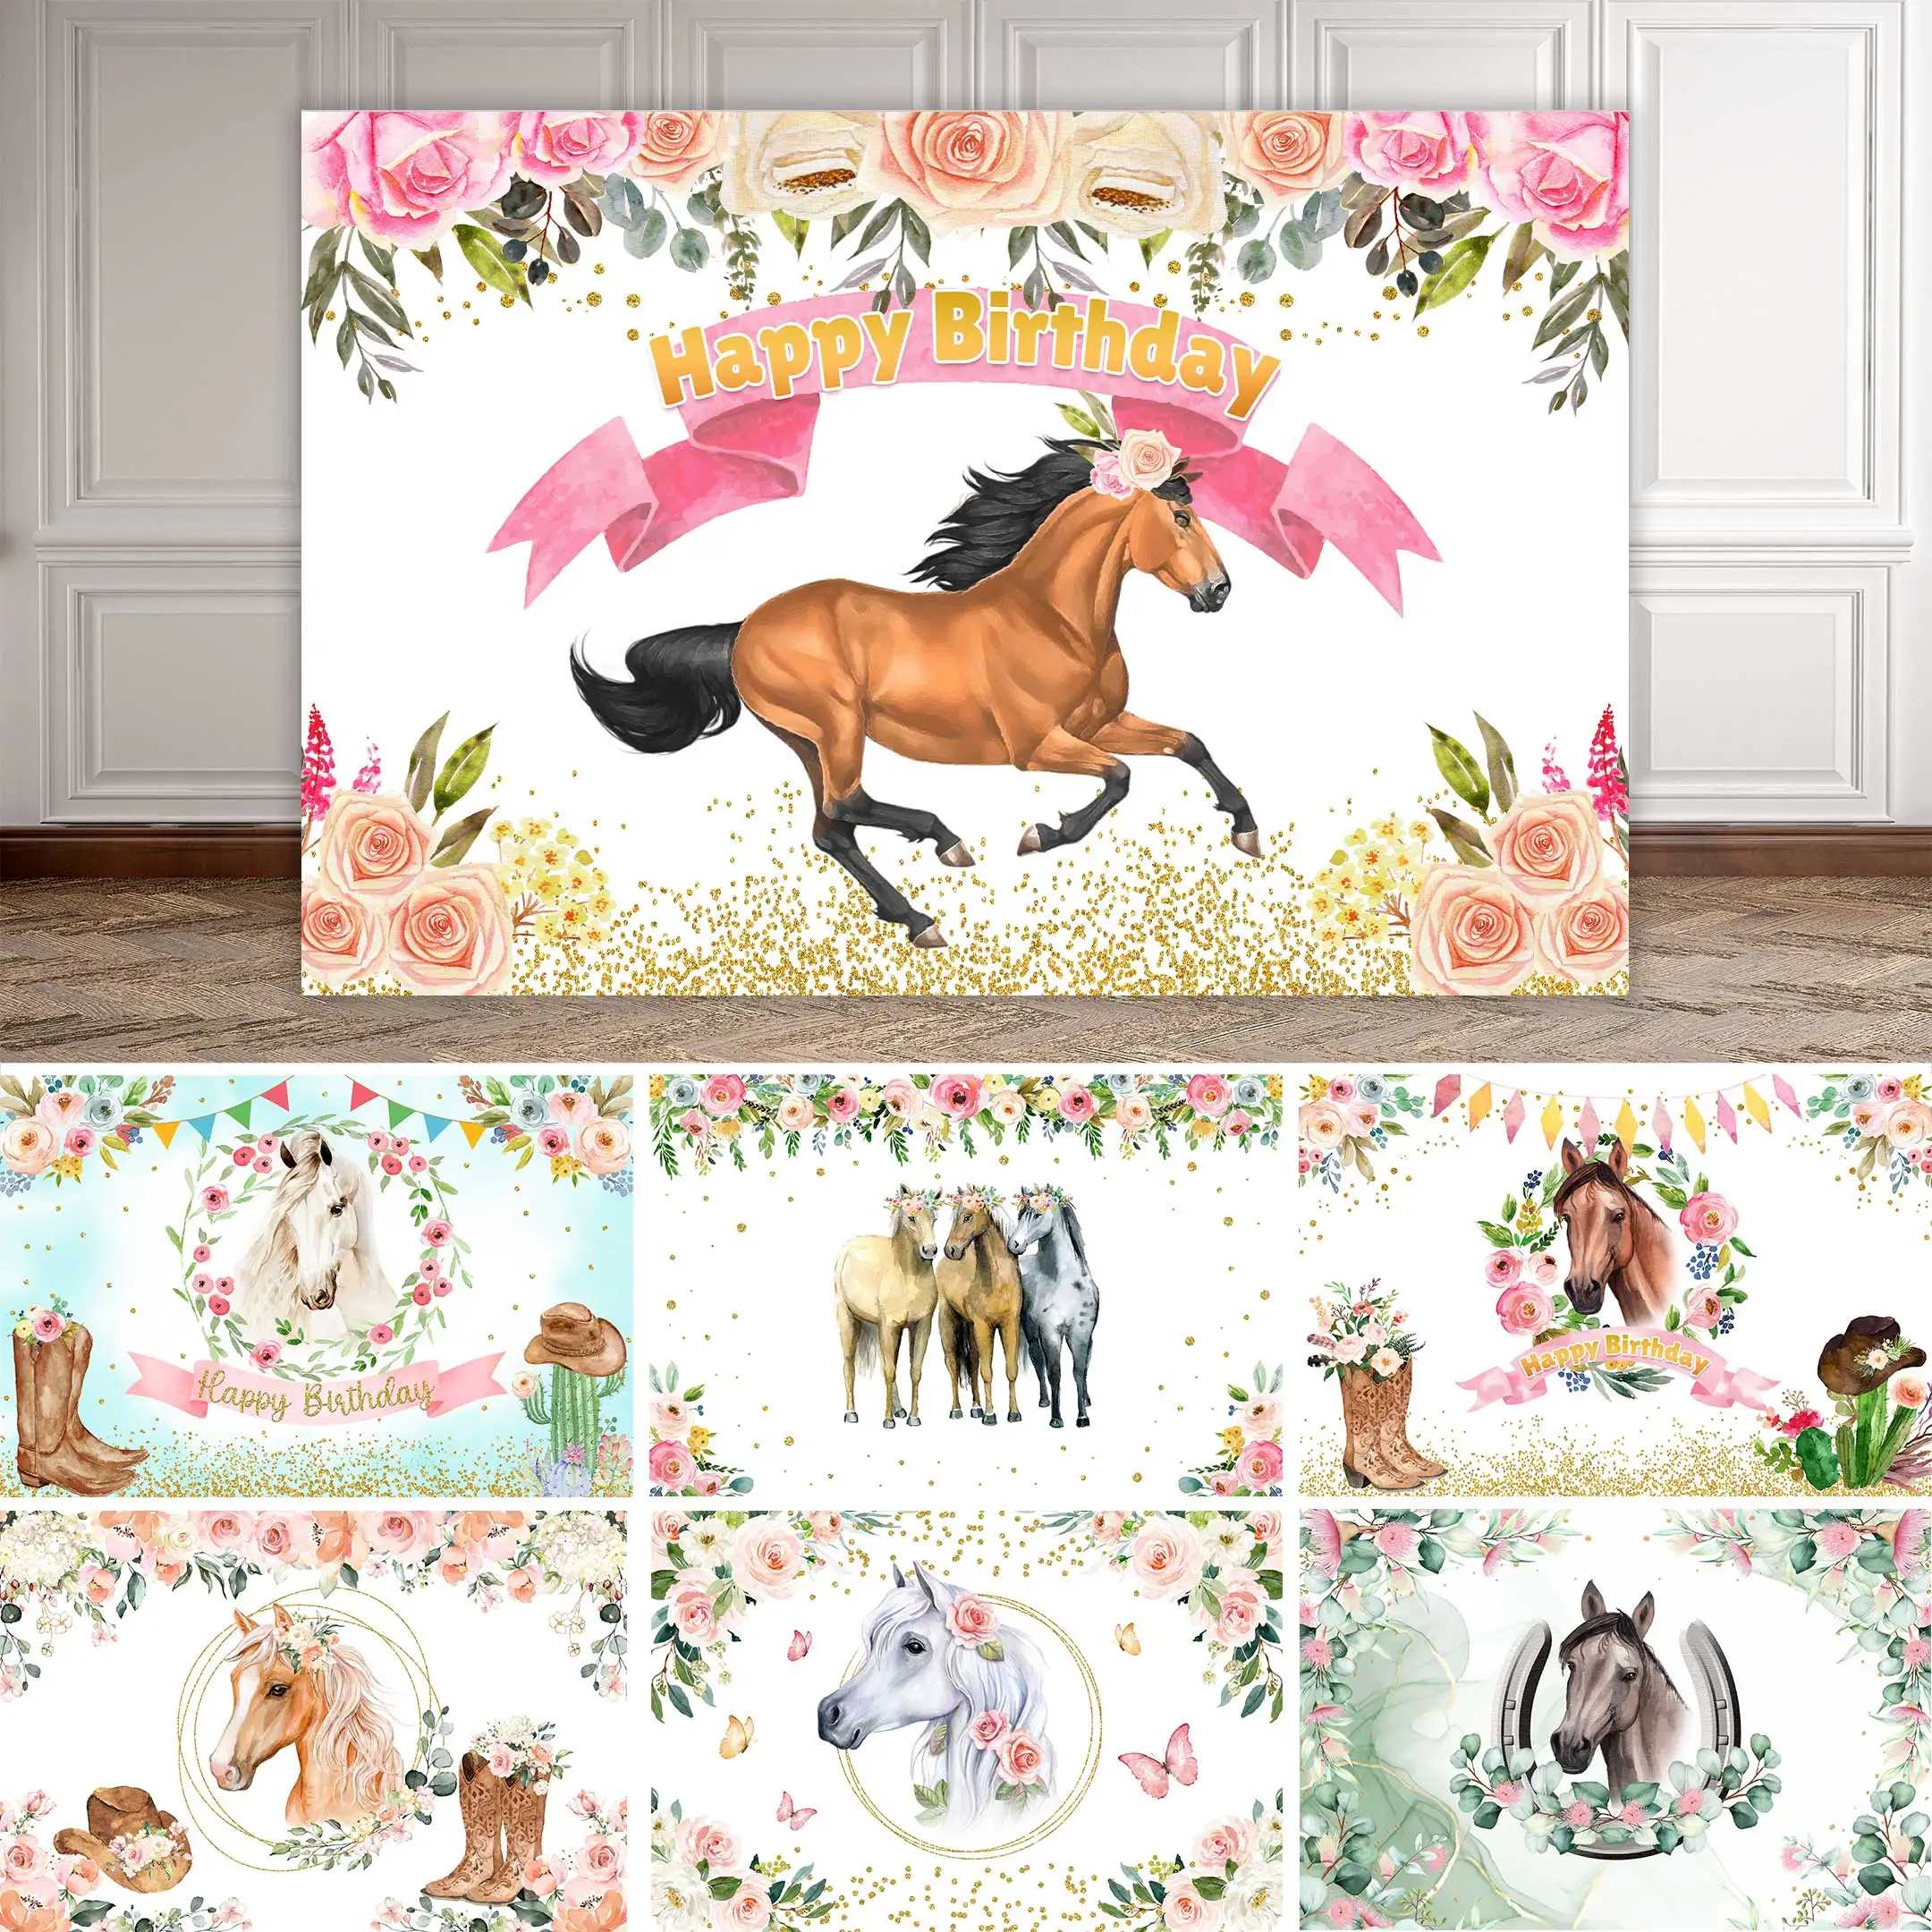 

NeoBack Horse Birthday Backdrop Cowgirl Western Farm Background Watercolor Flowers Baby Shower Portrait Customized Photography